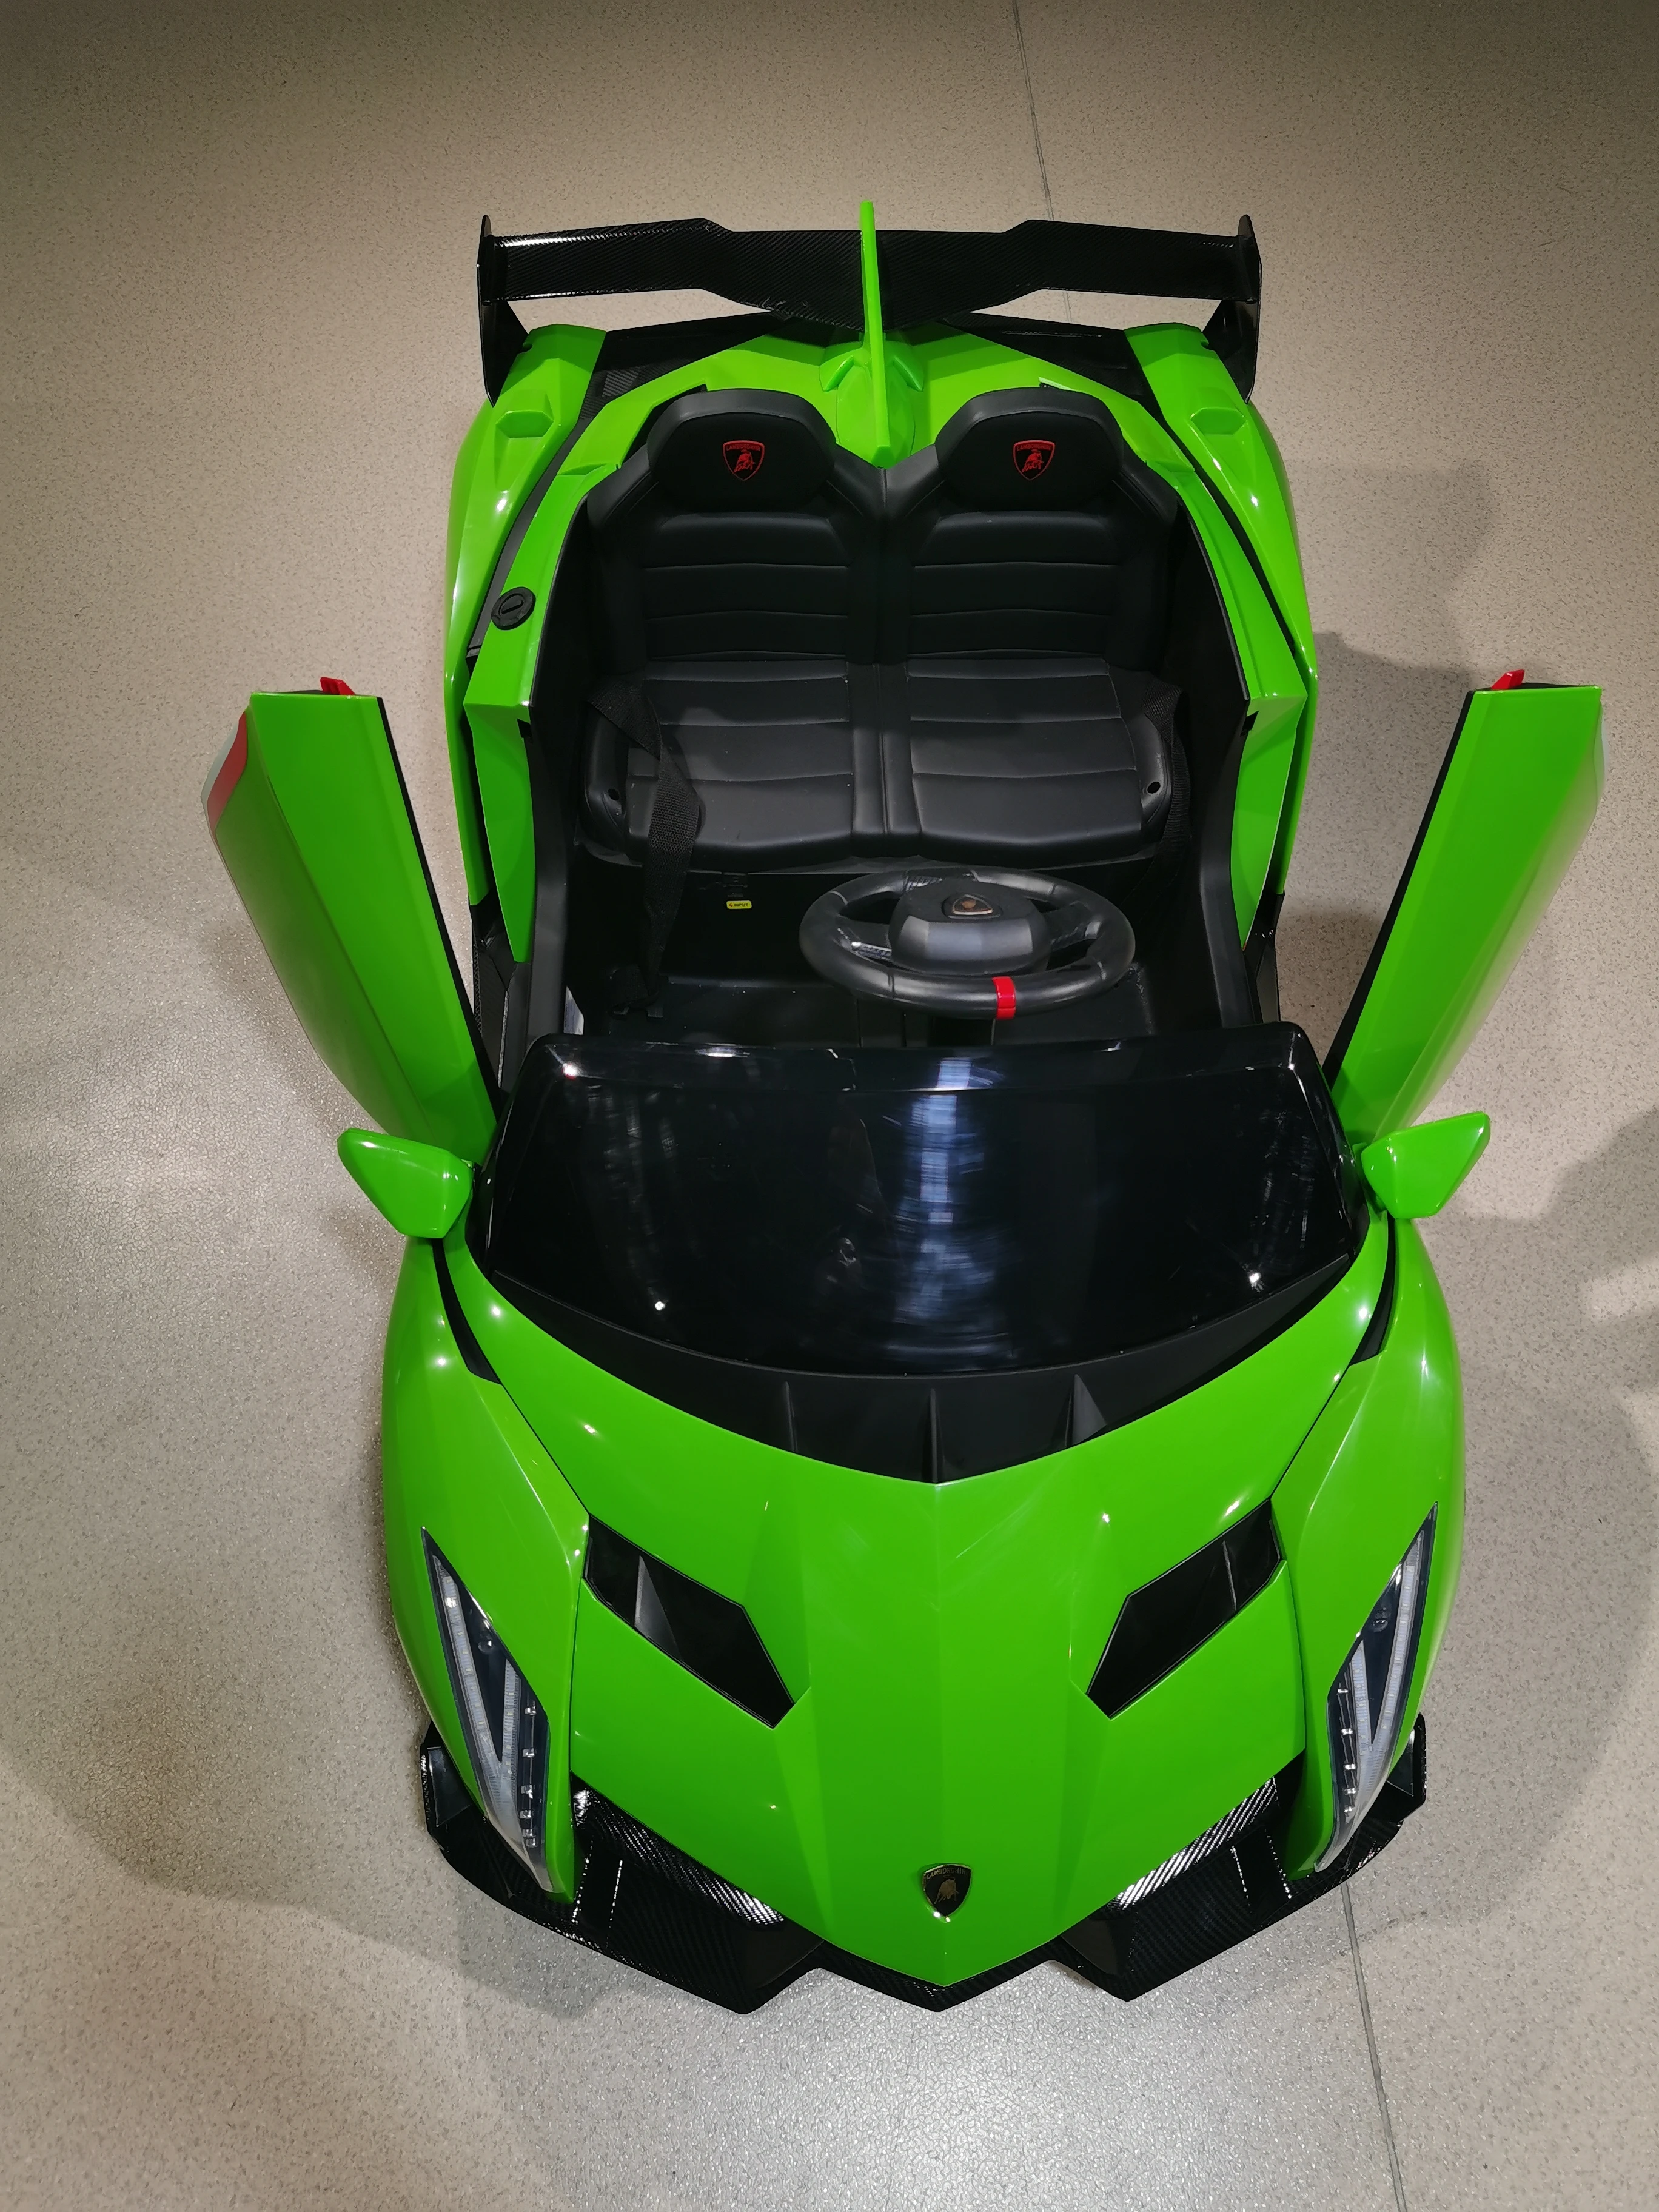 2020 luxury lamborghin battery operated toy ride on car ride on car children